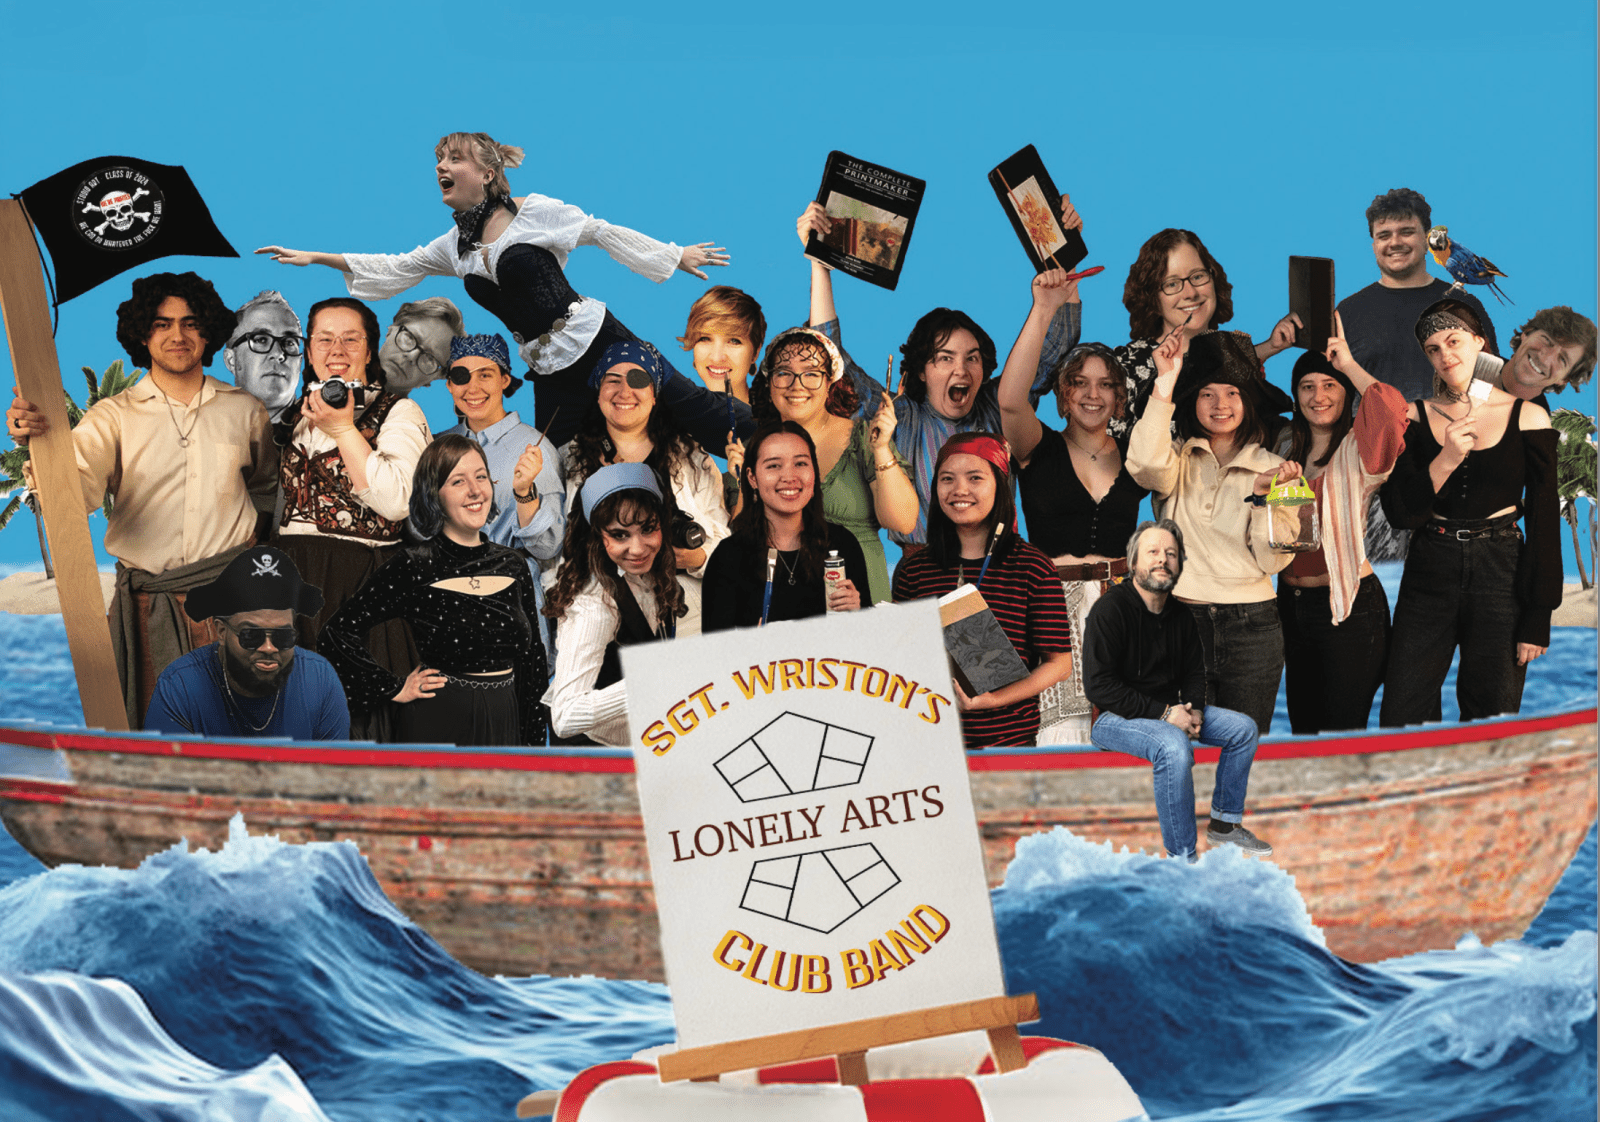 A group of people photo collaged onto a small boat, some dressed as pirates. A sign with the text "Sgt. Wriston's Lonely Arts Club Band" hangs from the side of the boat and rests on a lifepreserver in the water. 